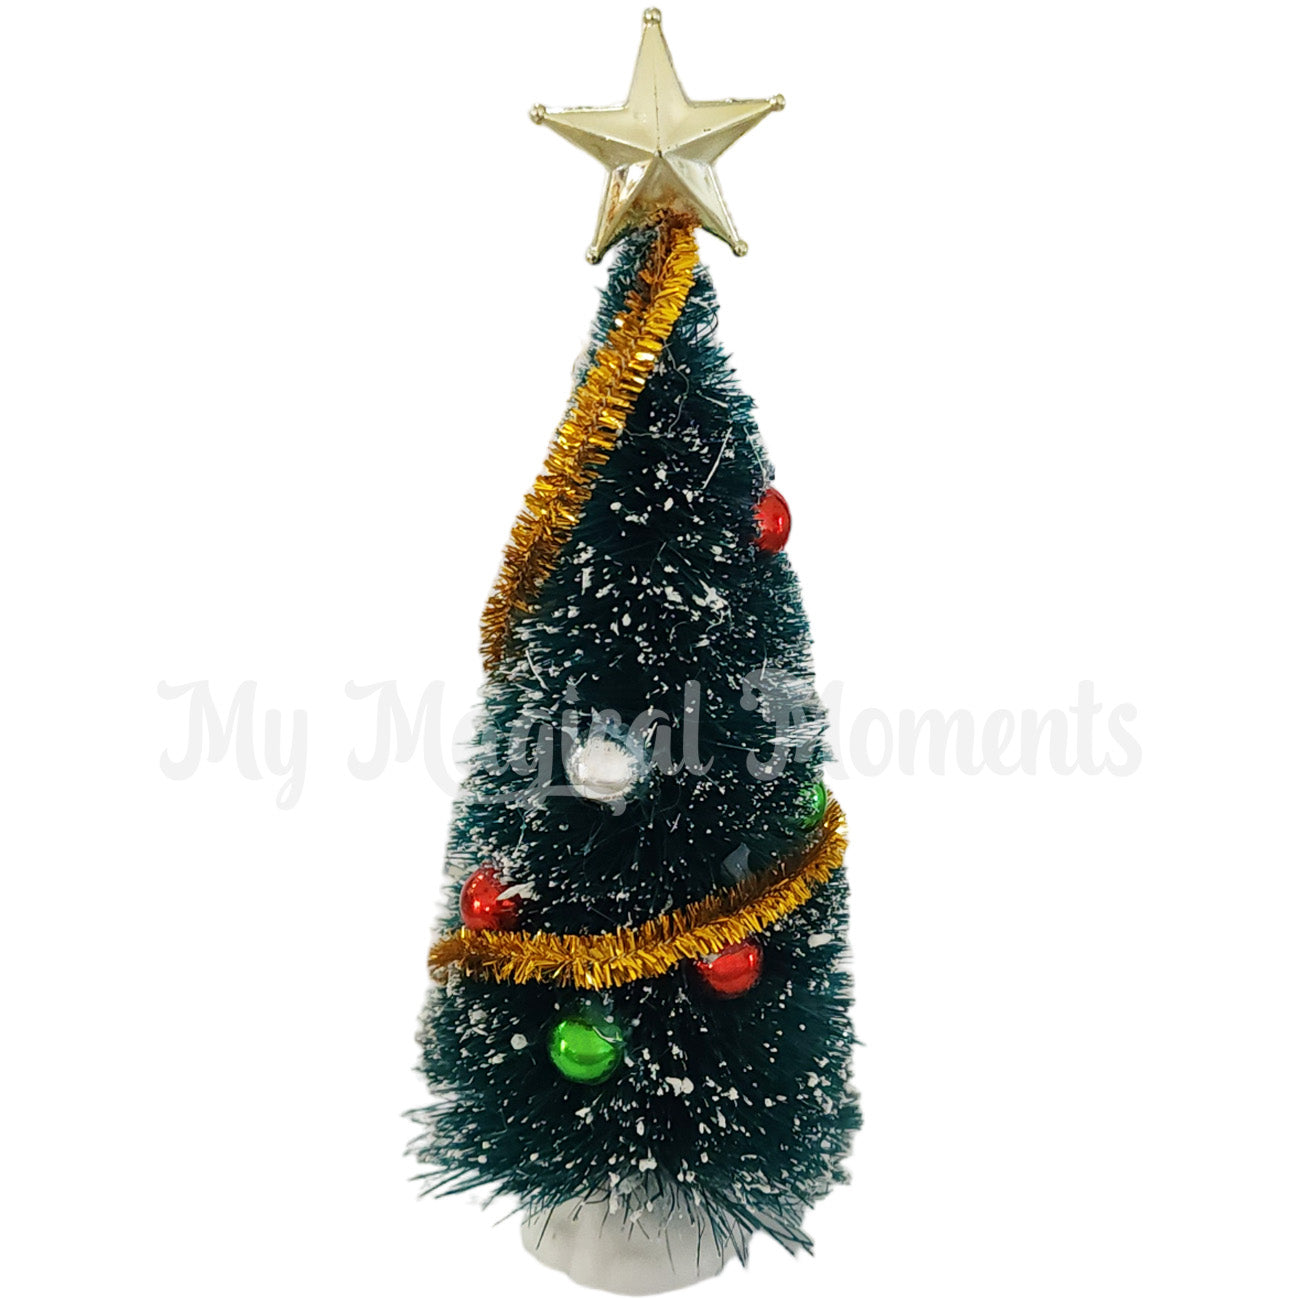 Miniature Christmas tree decorated with baubles, star and tinsel. Elf house accessory